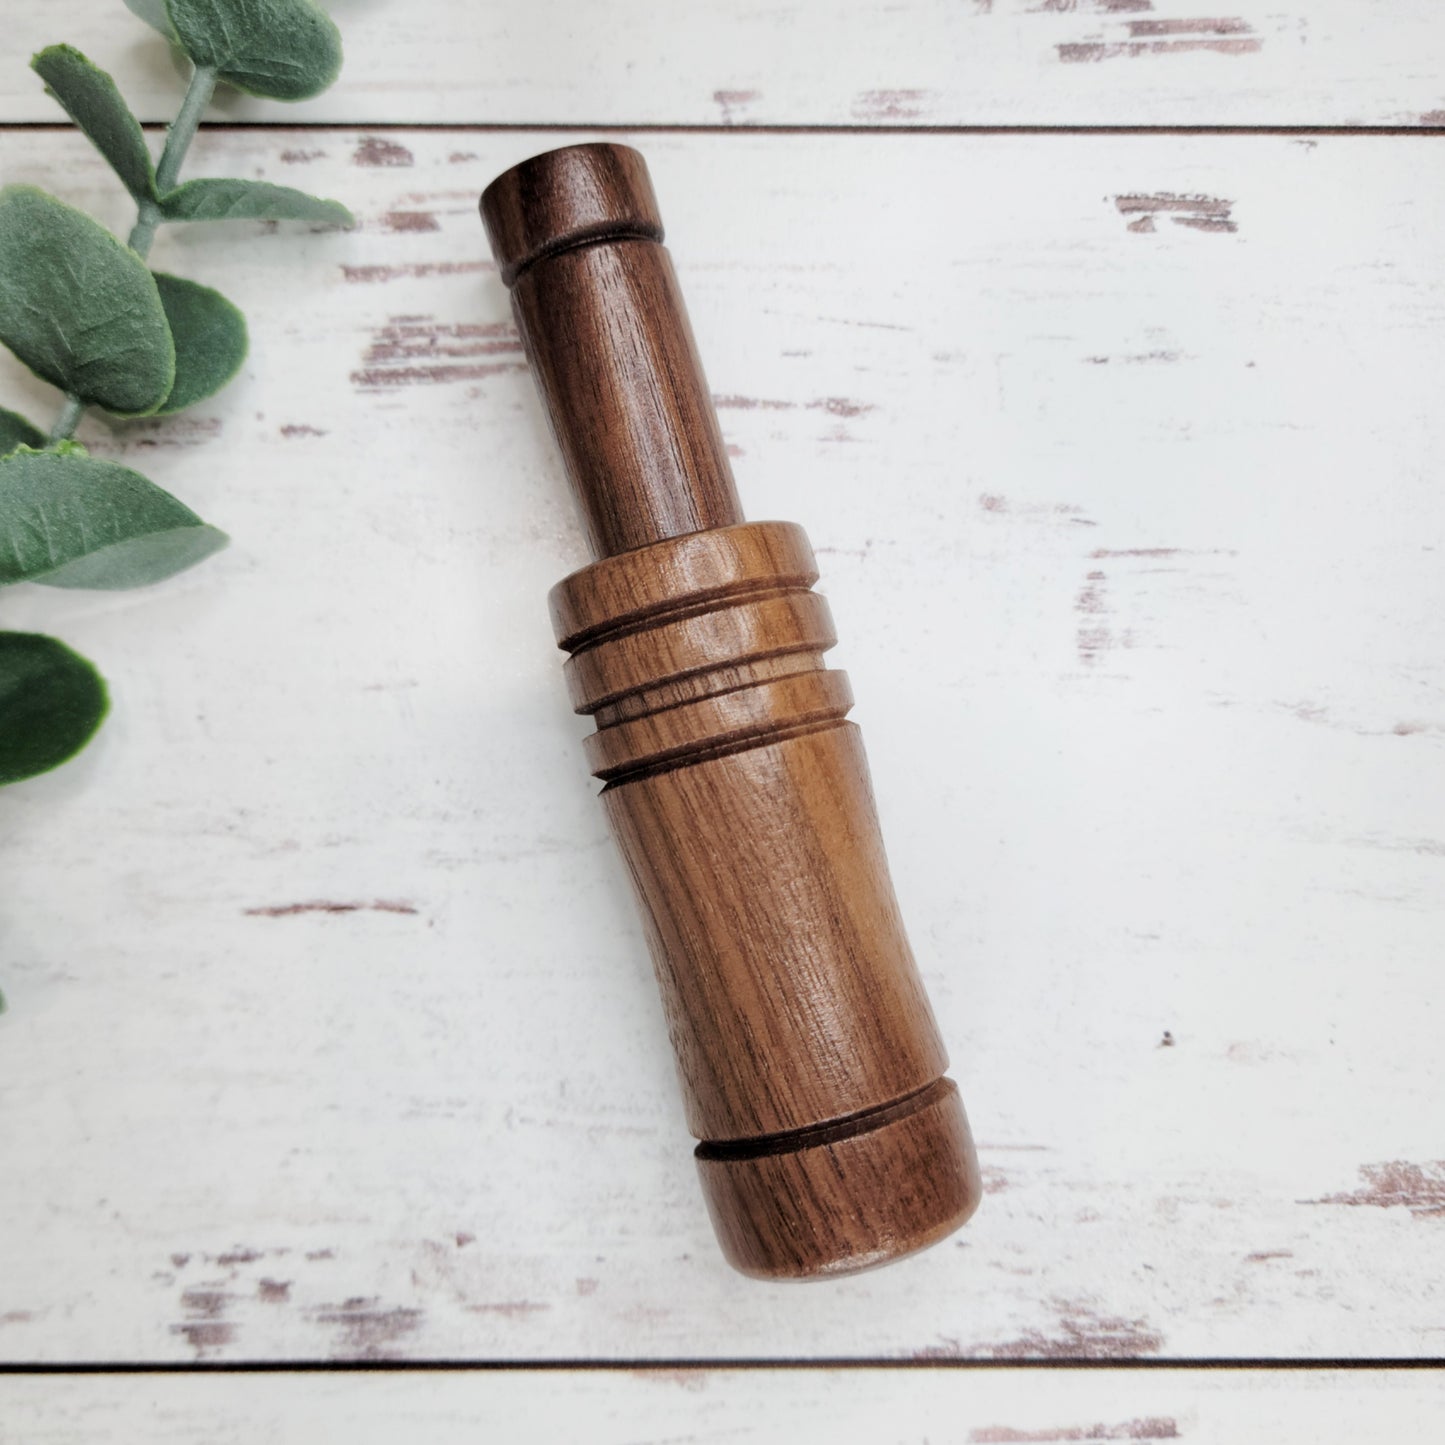 Duck Call, Wood Duck Call, Laser Engraving blank, wooden game call, RTS